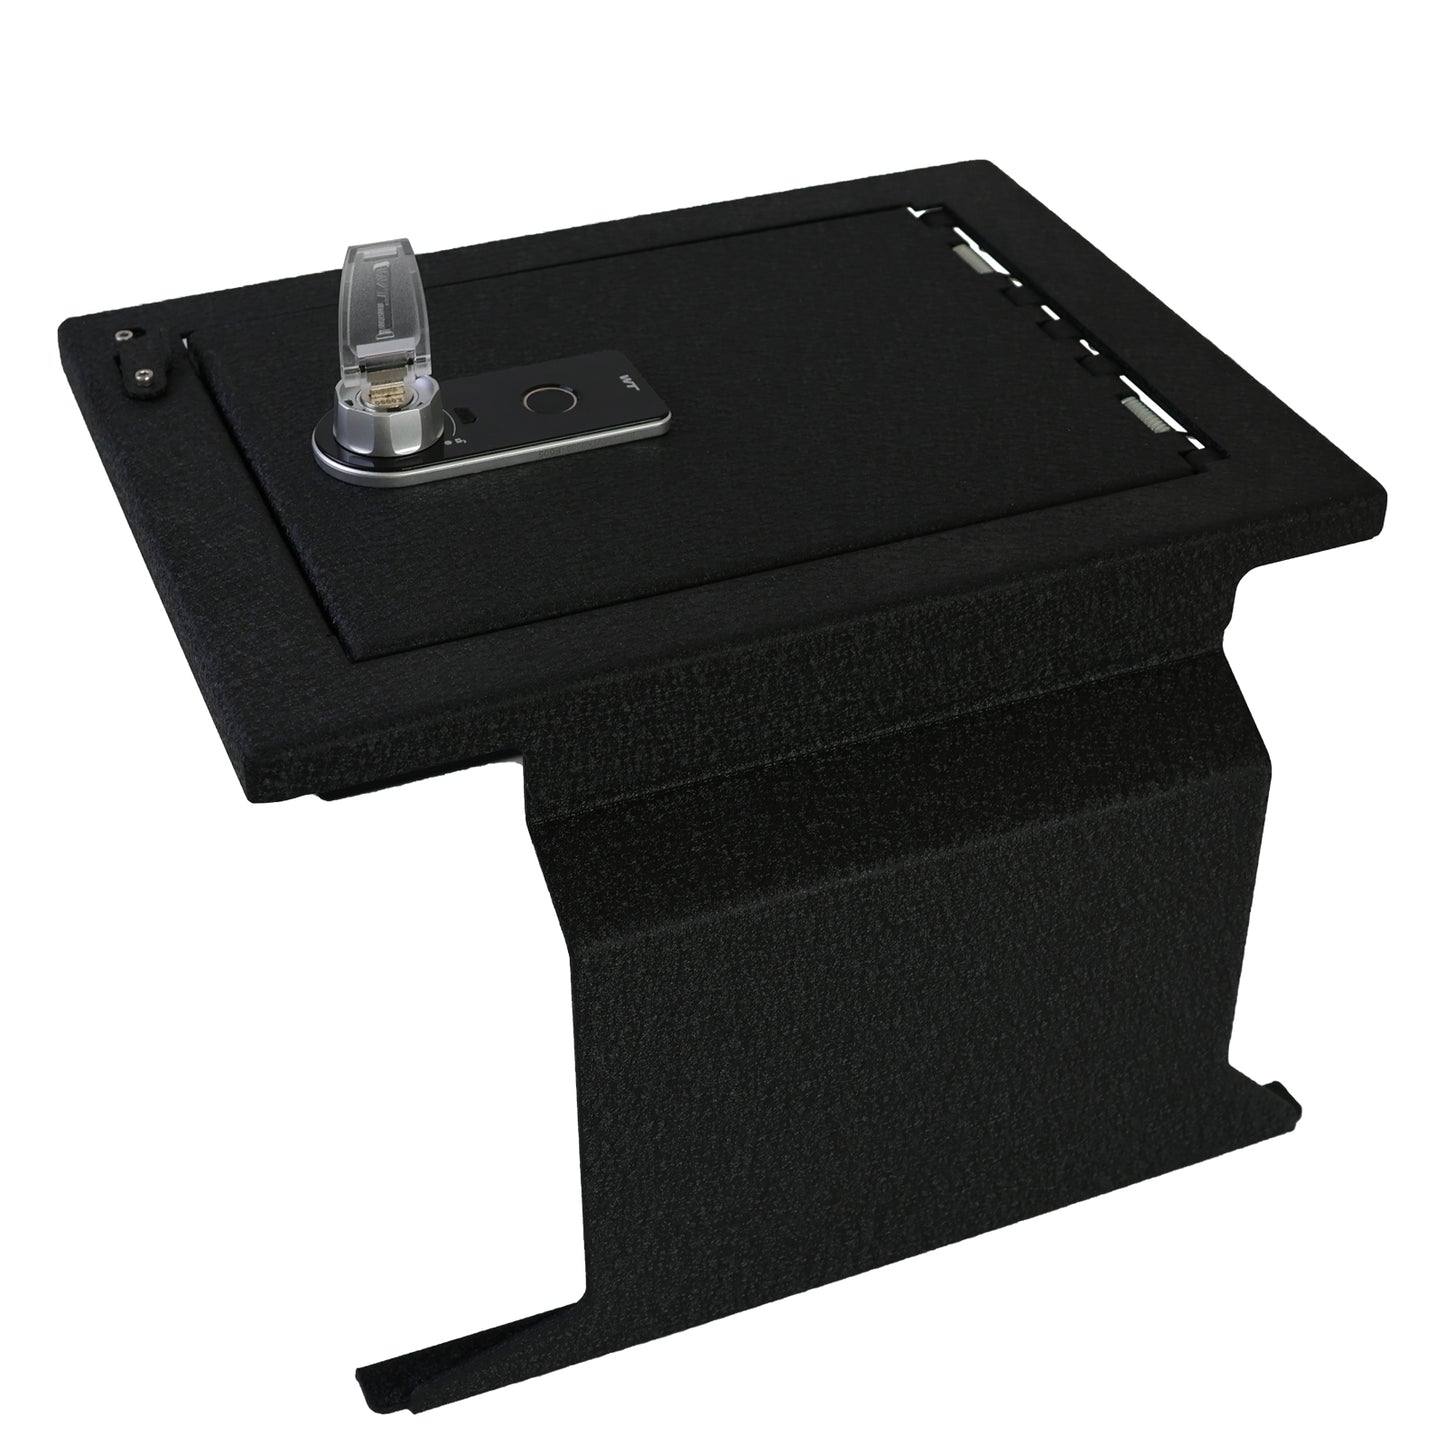 Center Console Safe Gun Safe for 2012-2014 Ford F150 with Full Floor Console as well as the Ford Raptor and the Ford Platinum models, Fingerprint Lock with Key